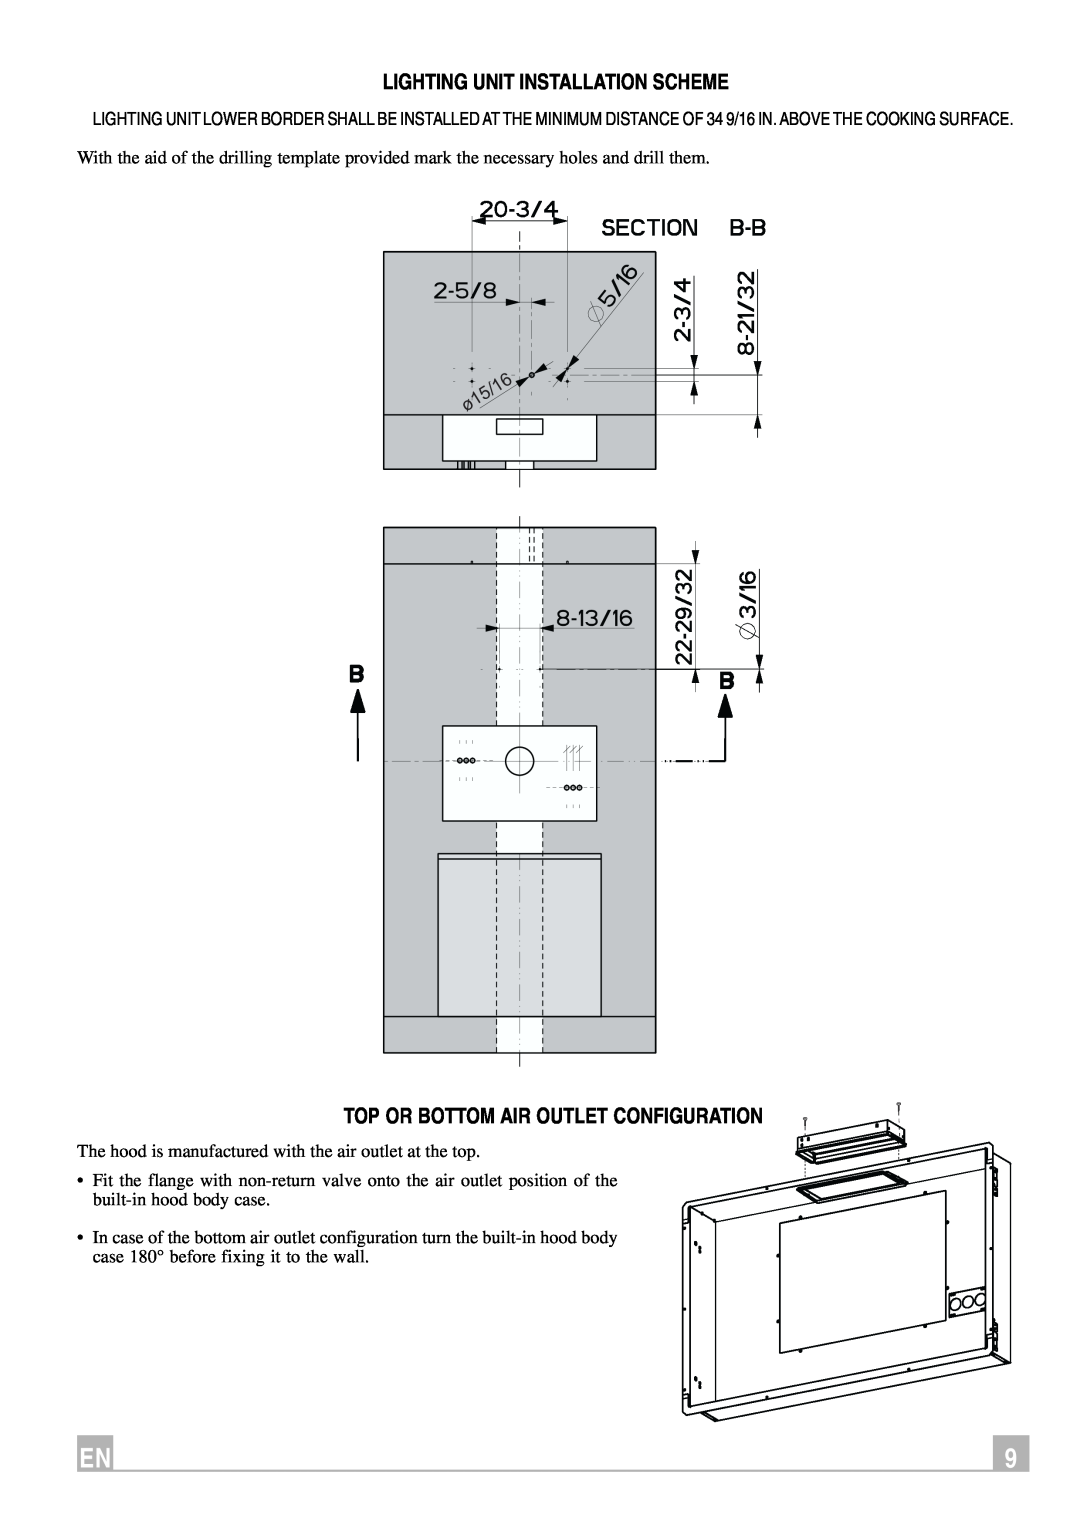 Faber Remote Blower instruction manual Lighting Unit Installation Scheme, Top Or Bottom Air Outlet Configuration 